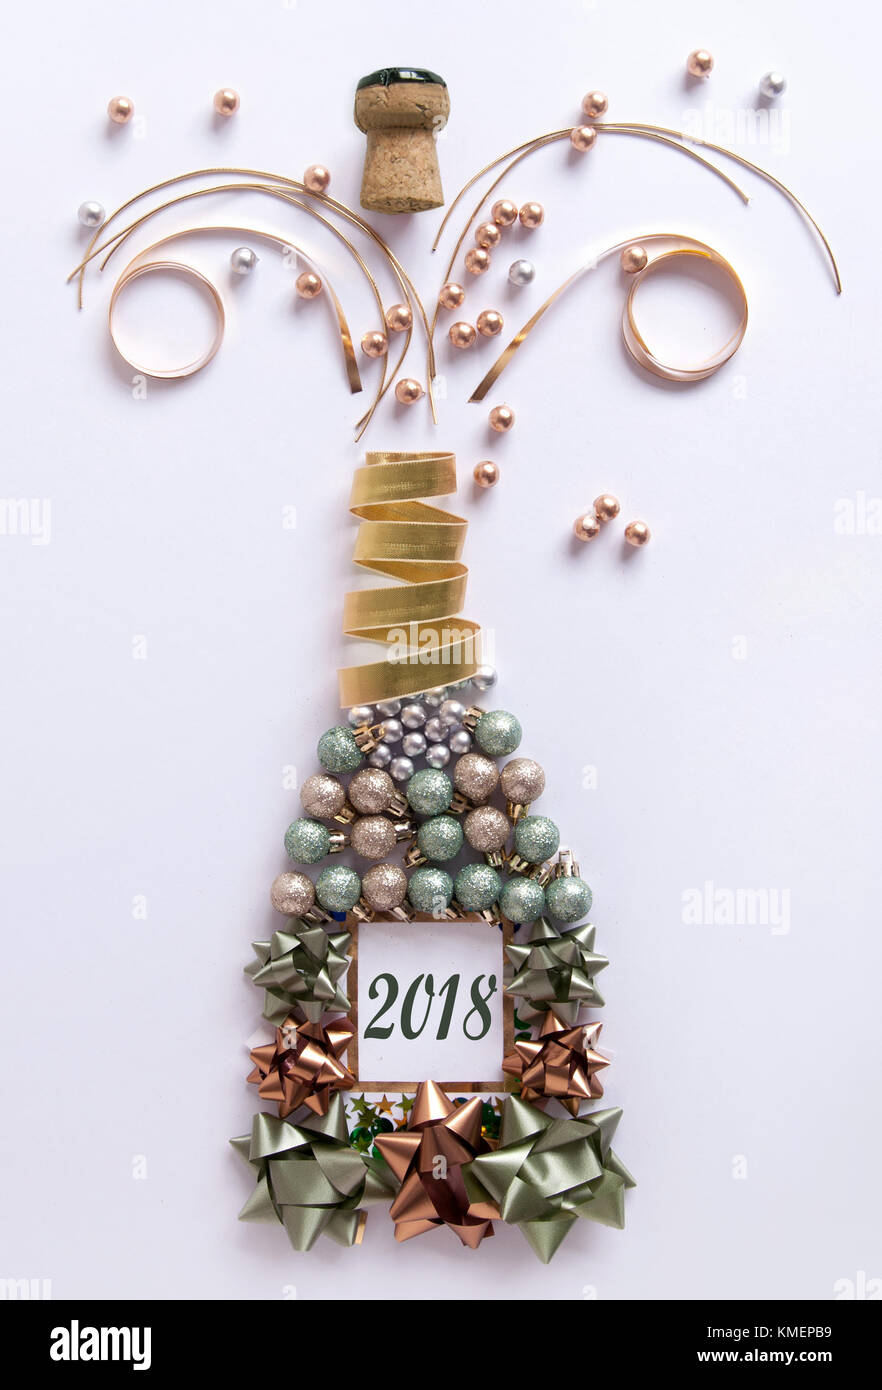 Open champagne bottle made from decorations including baubles and ...